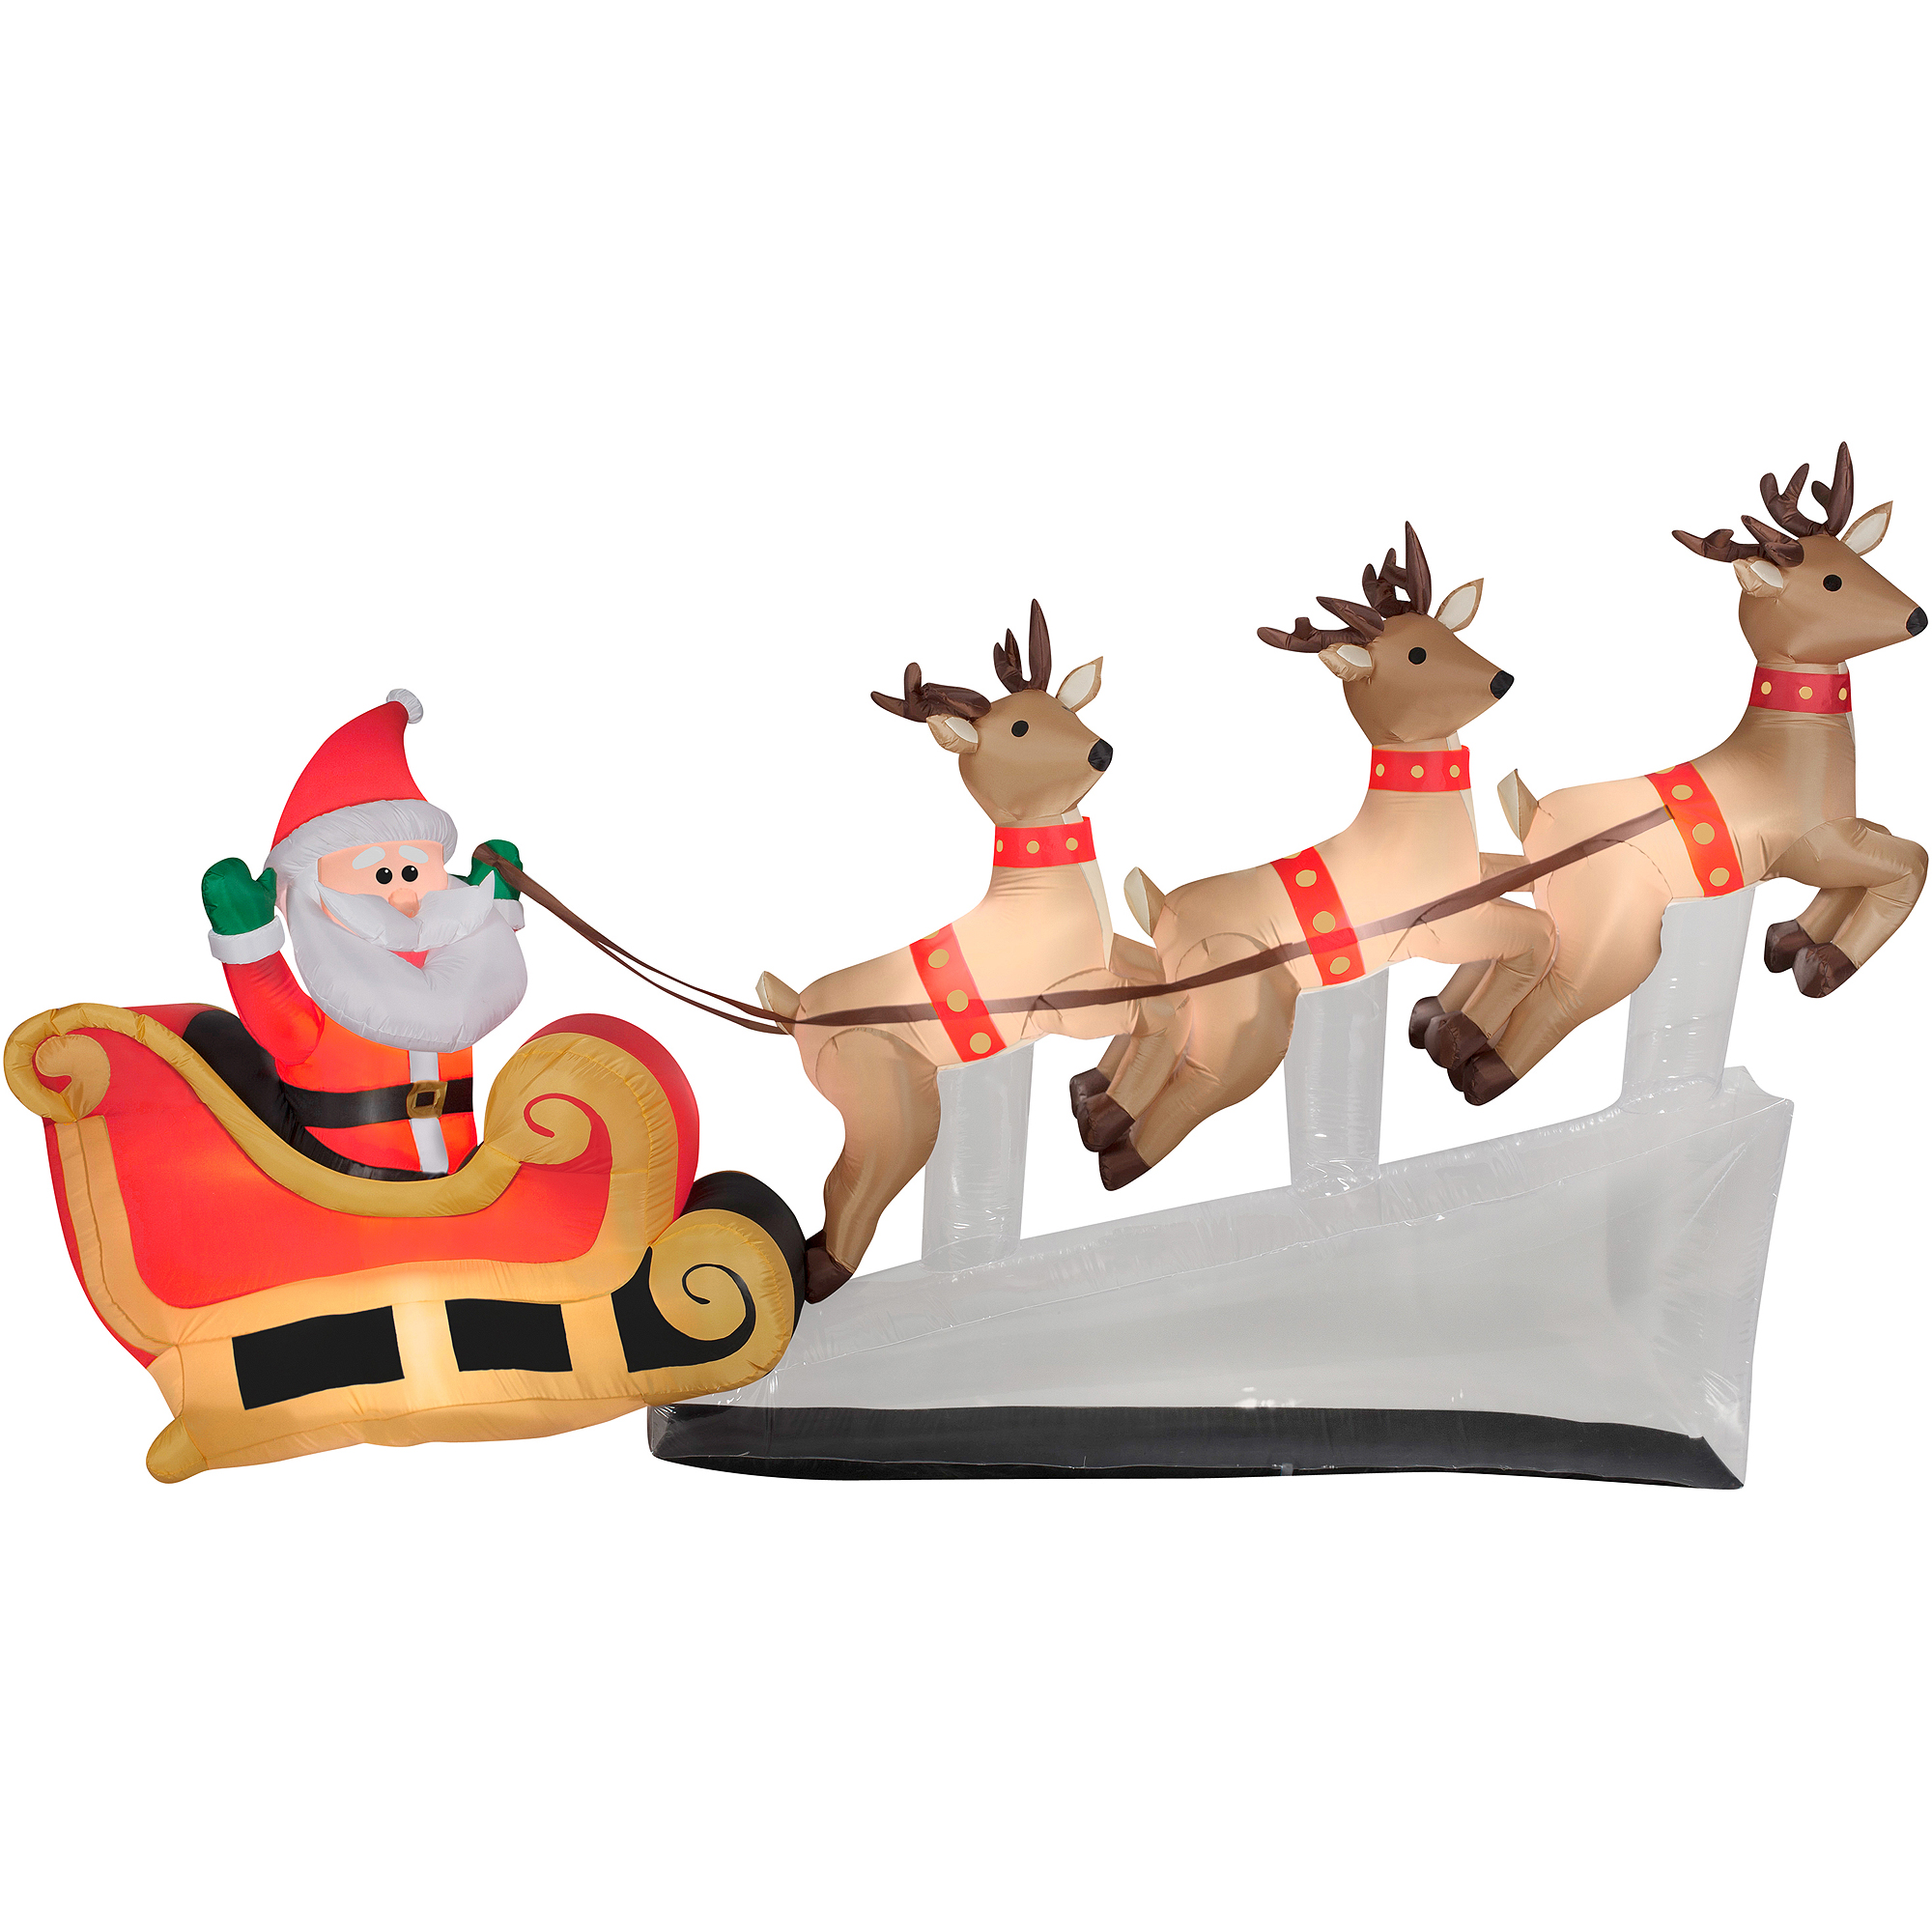 Gemmy Industries Yard Inflatables Floating Santa Sleigh with Reindeer, 6 ft - image 1 of 4